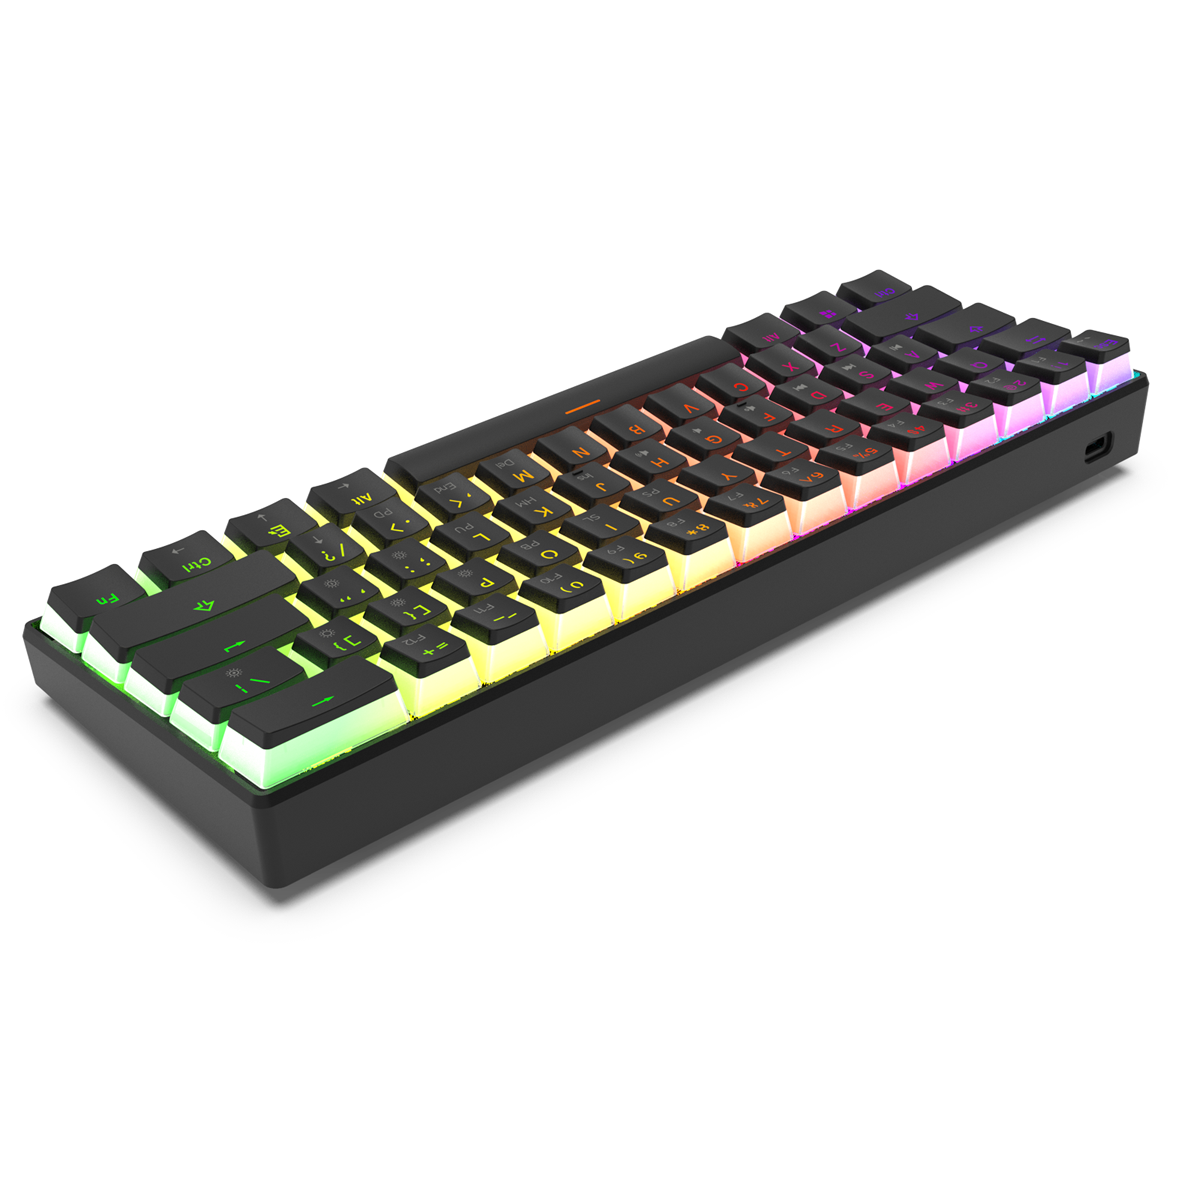 Gamakay MK61 Wired Mechanical Keyboard Gateron Optical Switch Pudding Keycaps RGB 61 Keys Hot Swappable Gaming Keyboard New Version 4